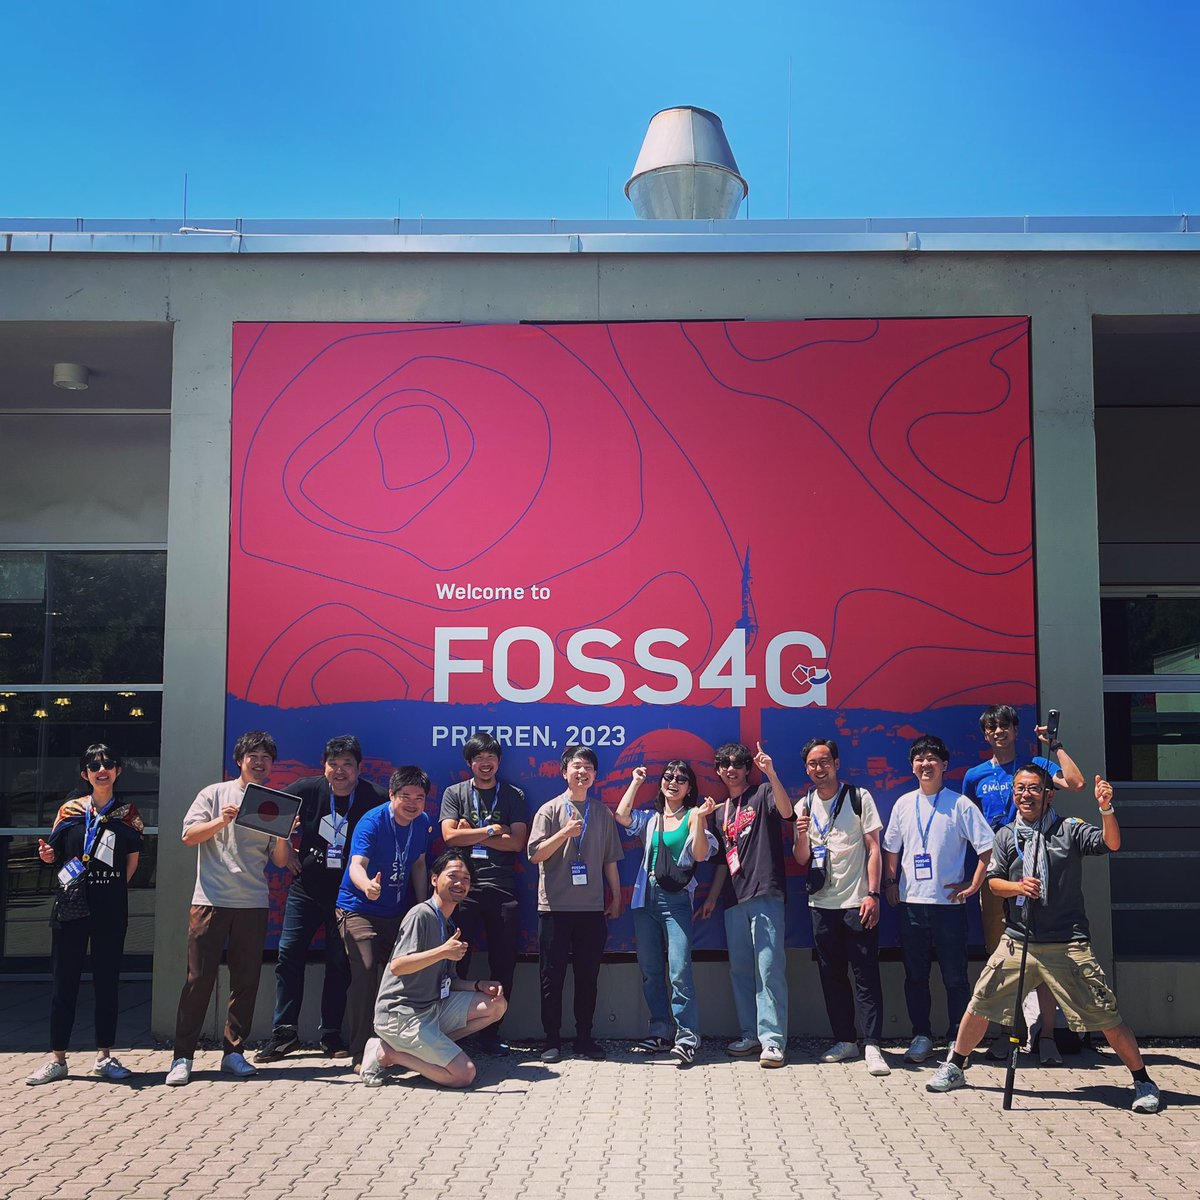 Group photo of Japanese members. But this is not all. I have to make a graduation photo!

#FOSS4G2023 #Kosovo #Japan #FOSS4G #FuruhashiLab #古橋研究室